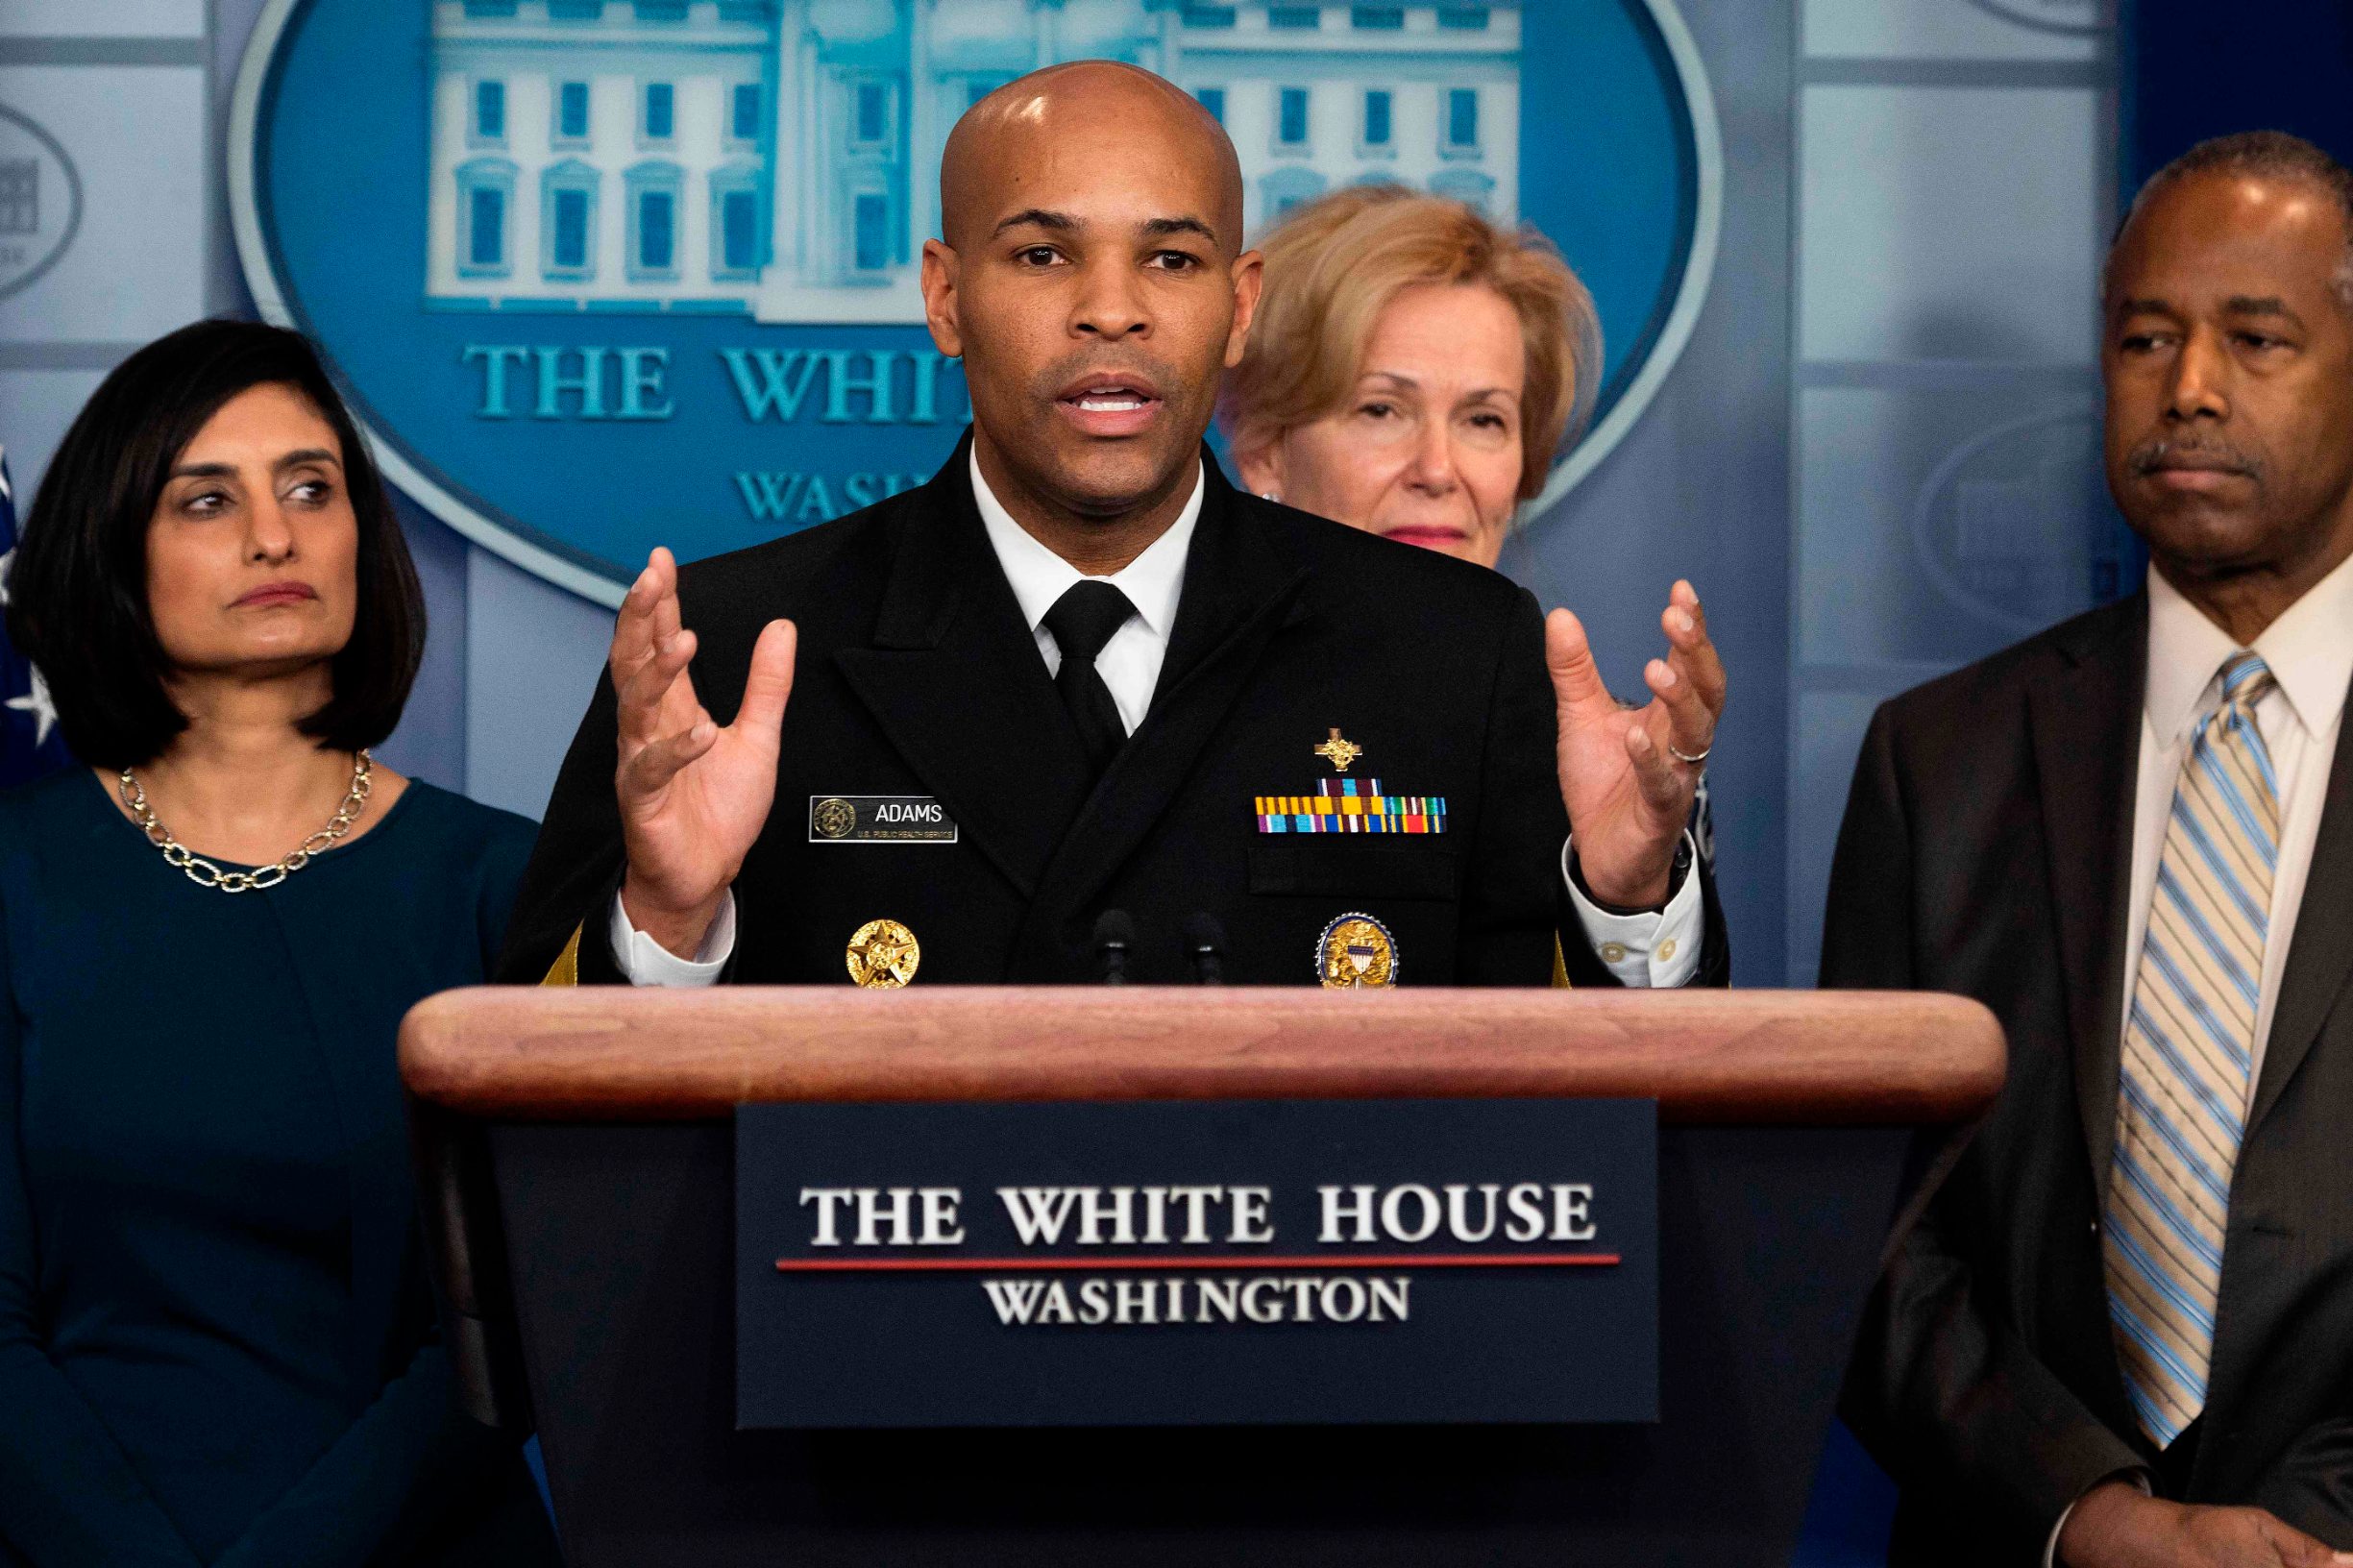 US Surgeon General Jerome Adams speaks during a press briefing about the Coronavirus (COVID-19) in the Brady Press Briefing Room at the White House in Washington, DC, March 14, 2020. (Photo by JIM WATSON / AFP)